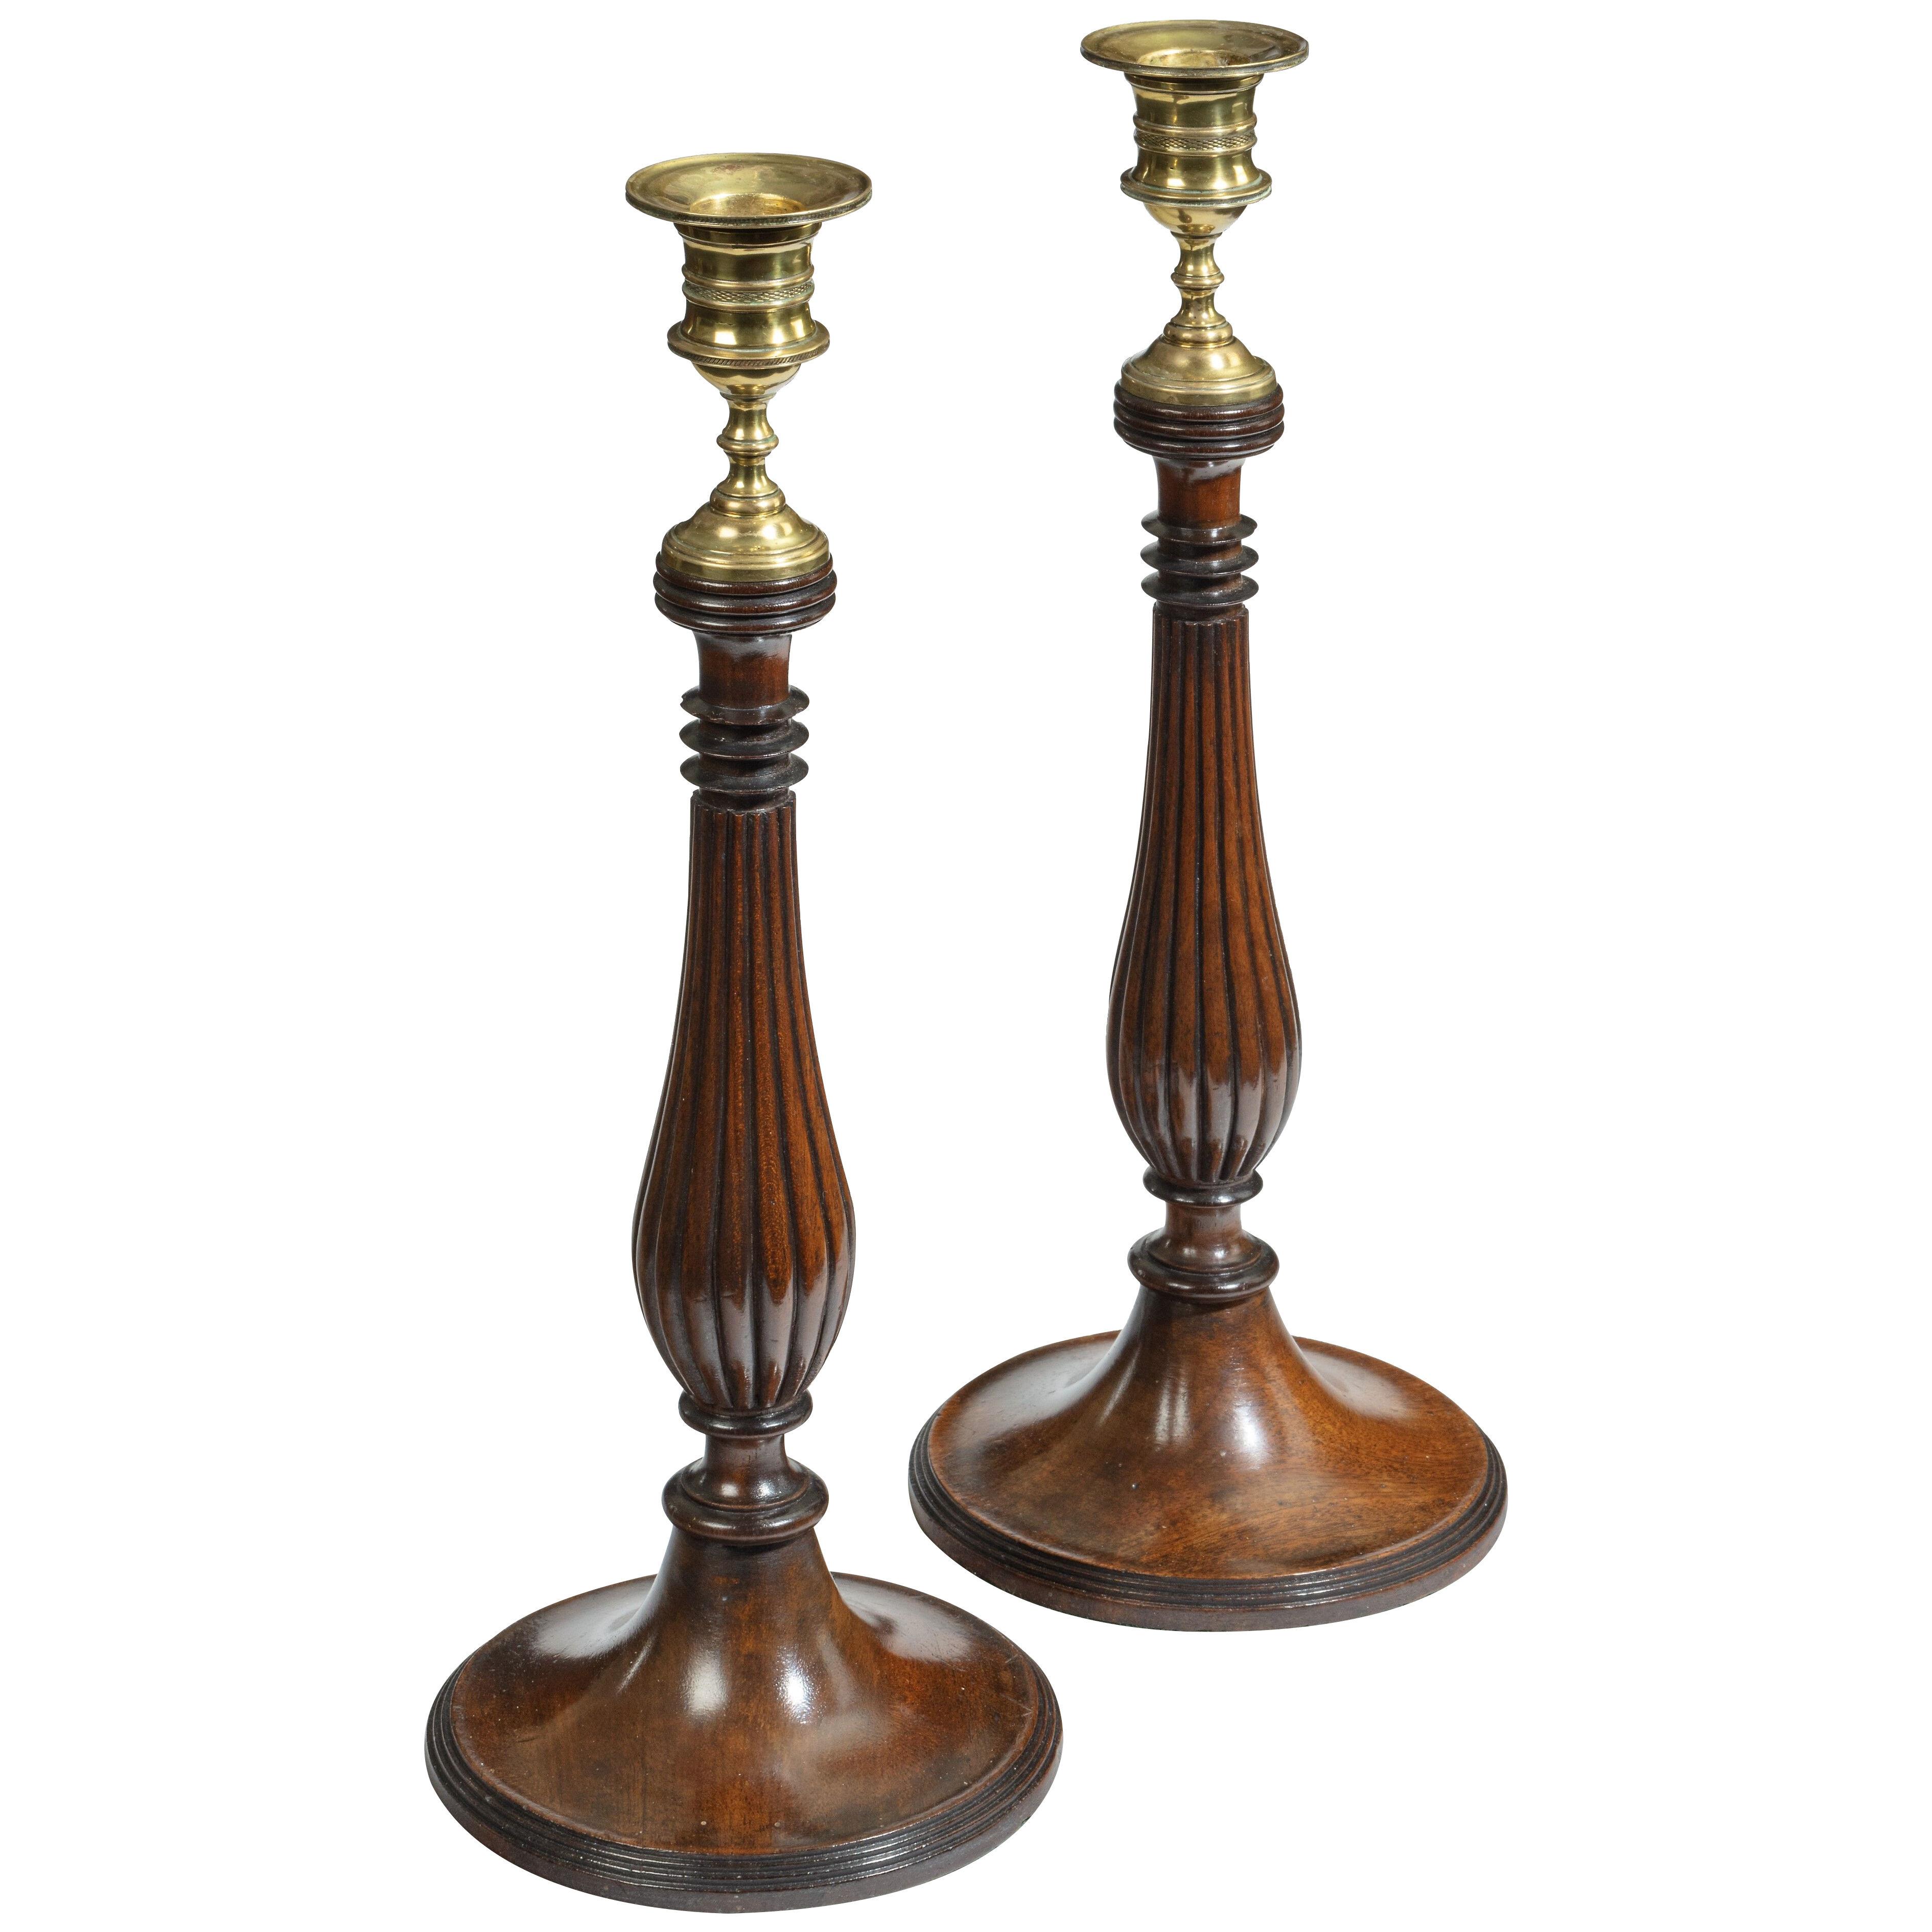 Pair of George III Mahogany Candlesticks in the manner of Gillows